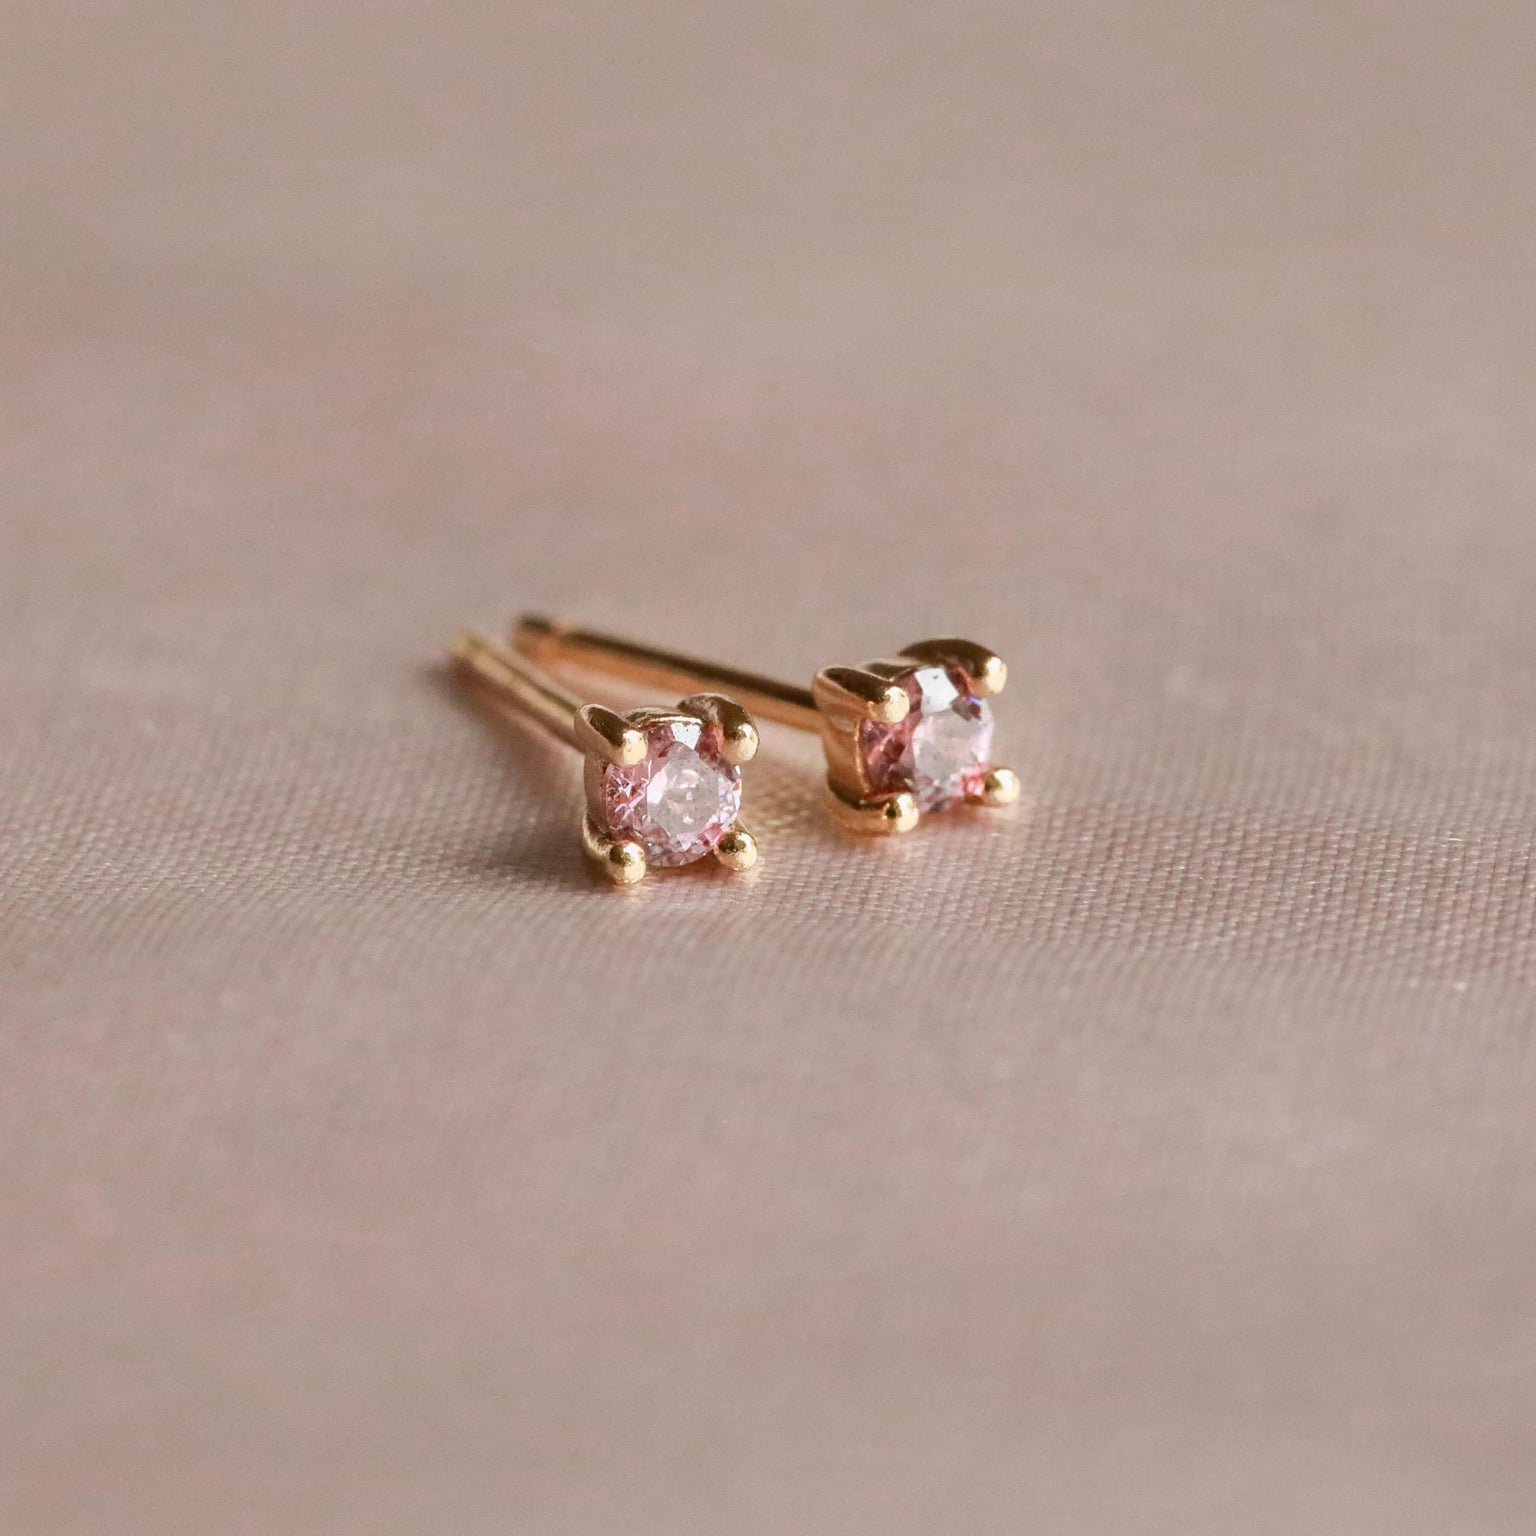 October Birthstone Stud Earrings in Gold with Pink Tourmaline CZ